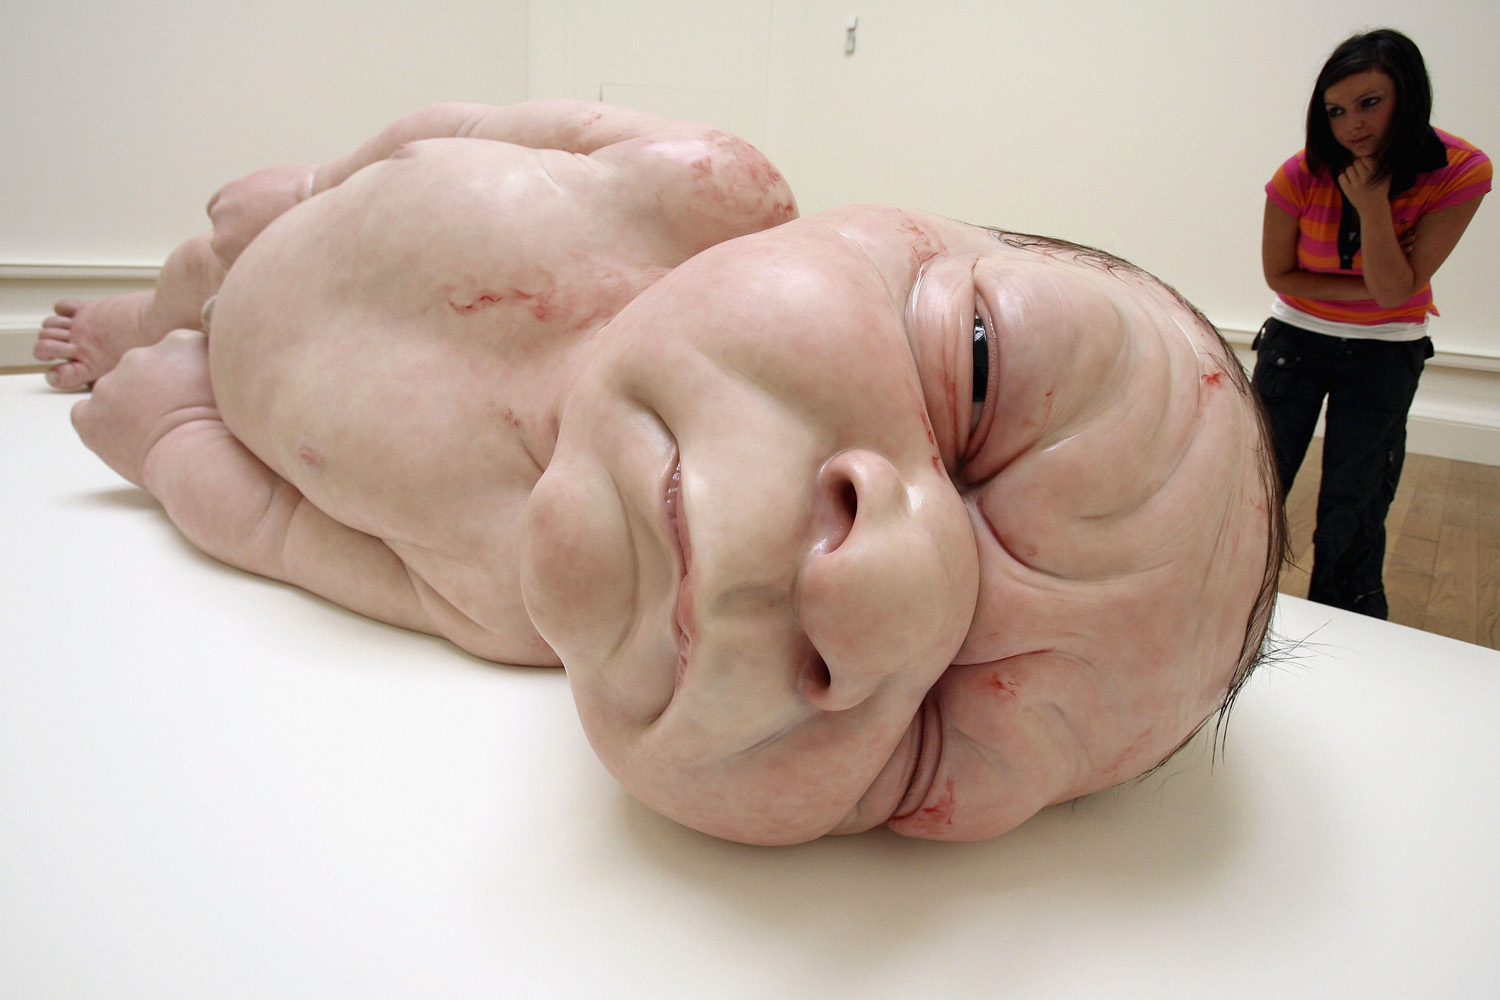 These 18 Sculptures By An Australian Artist Are So Lifelike You’ll Swear They’re Real